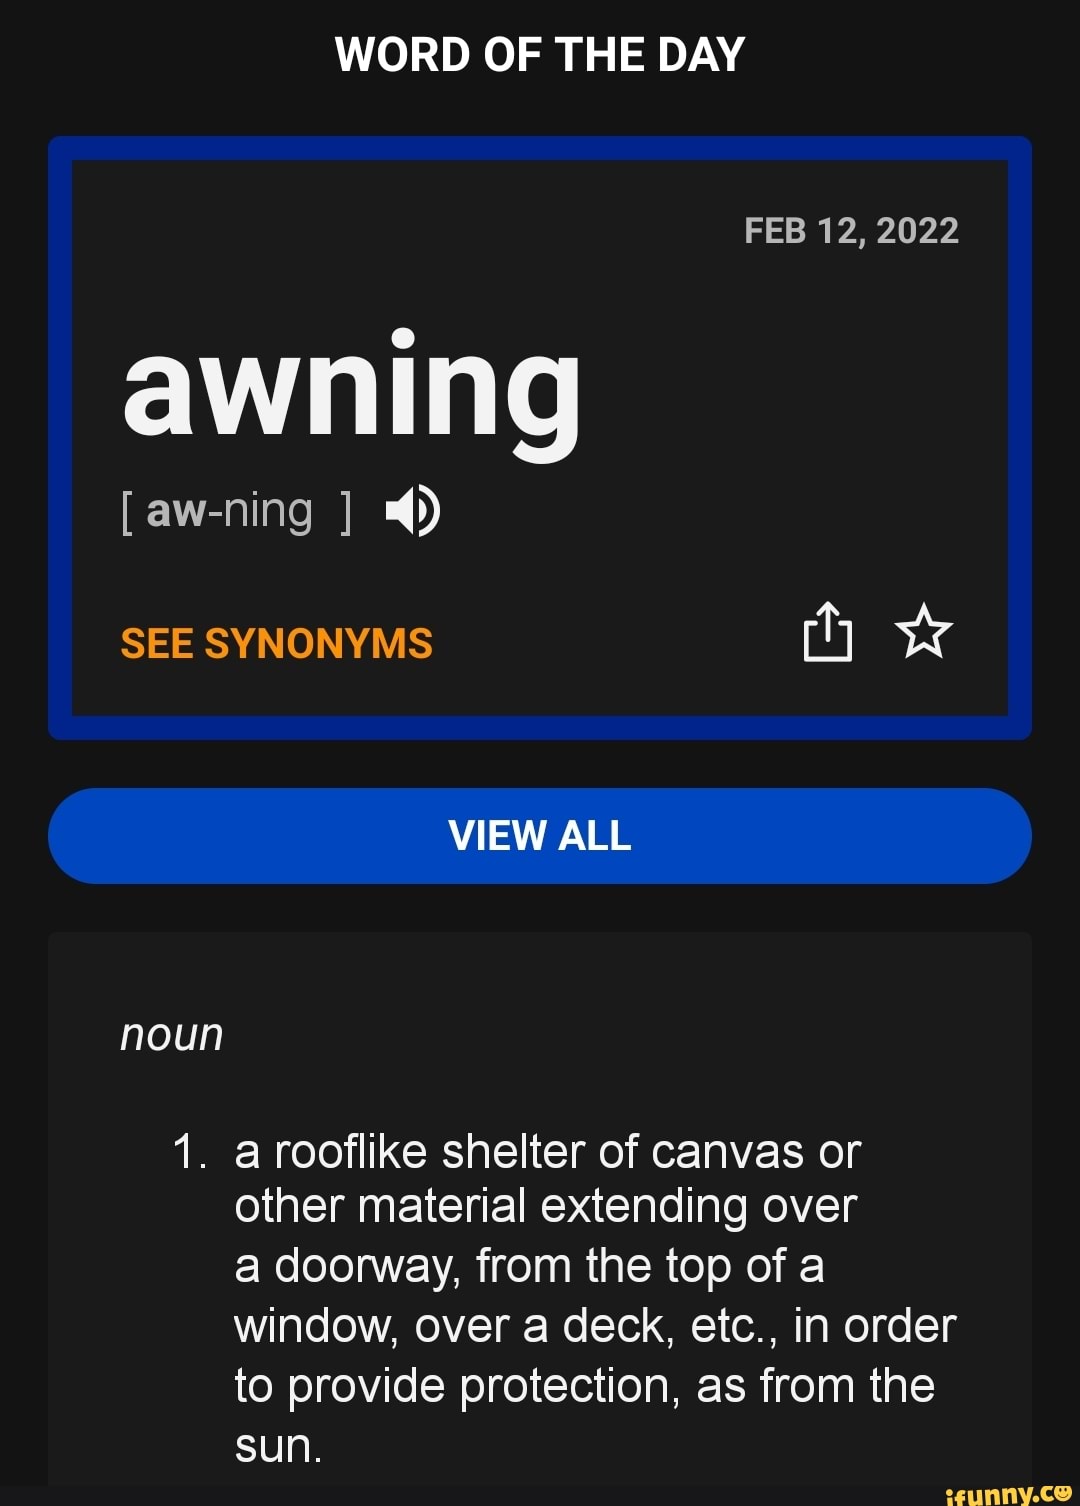 WORD OF THE DAY, Unnerve synonyms antonyms and usage